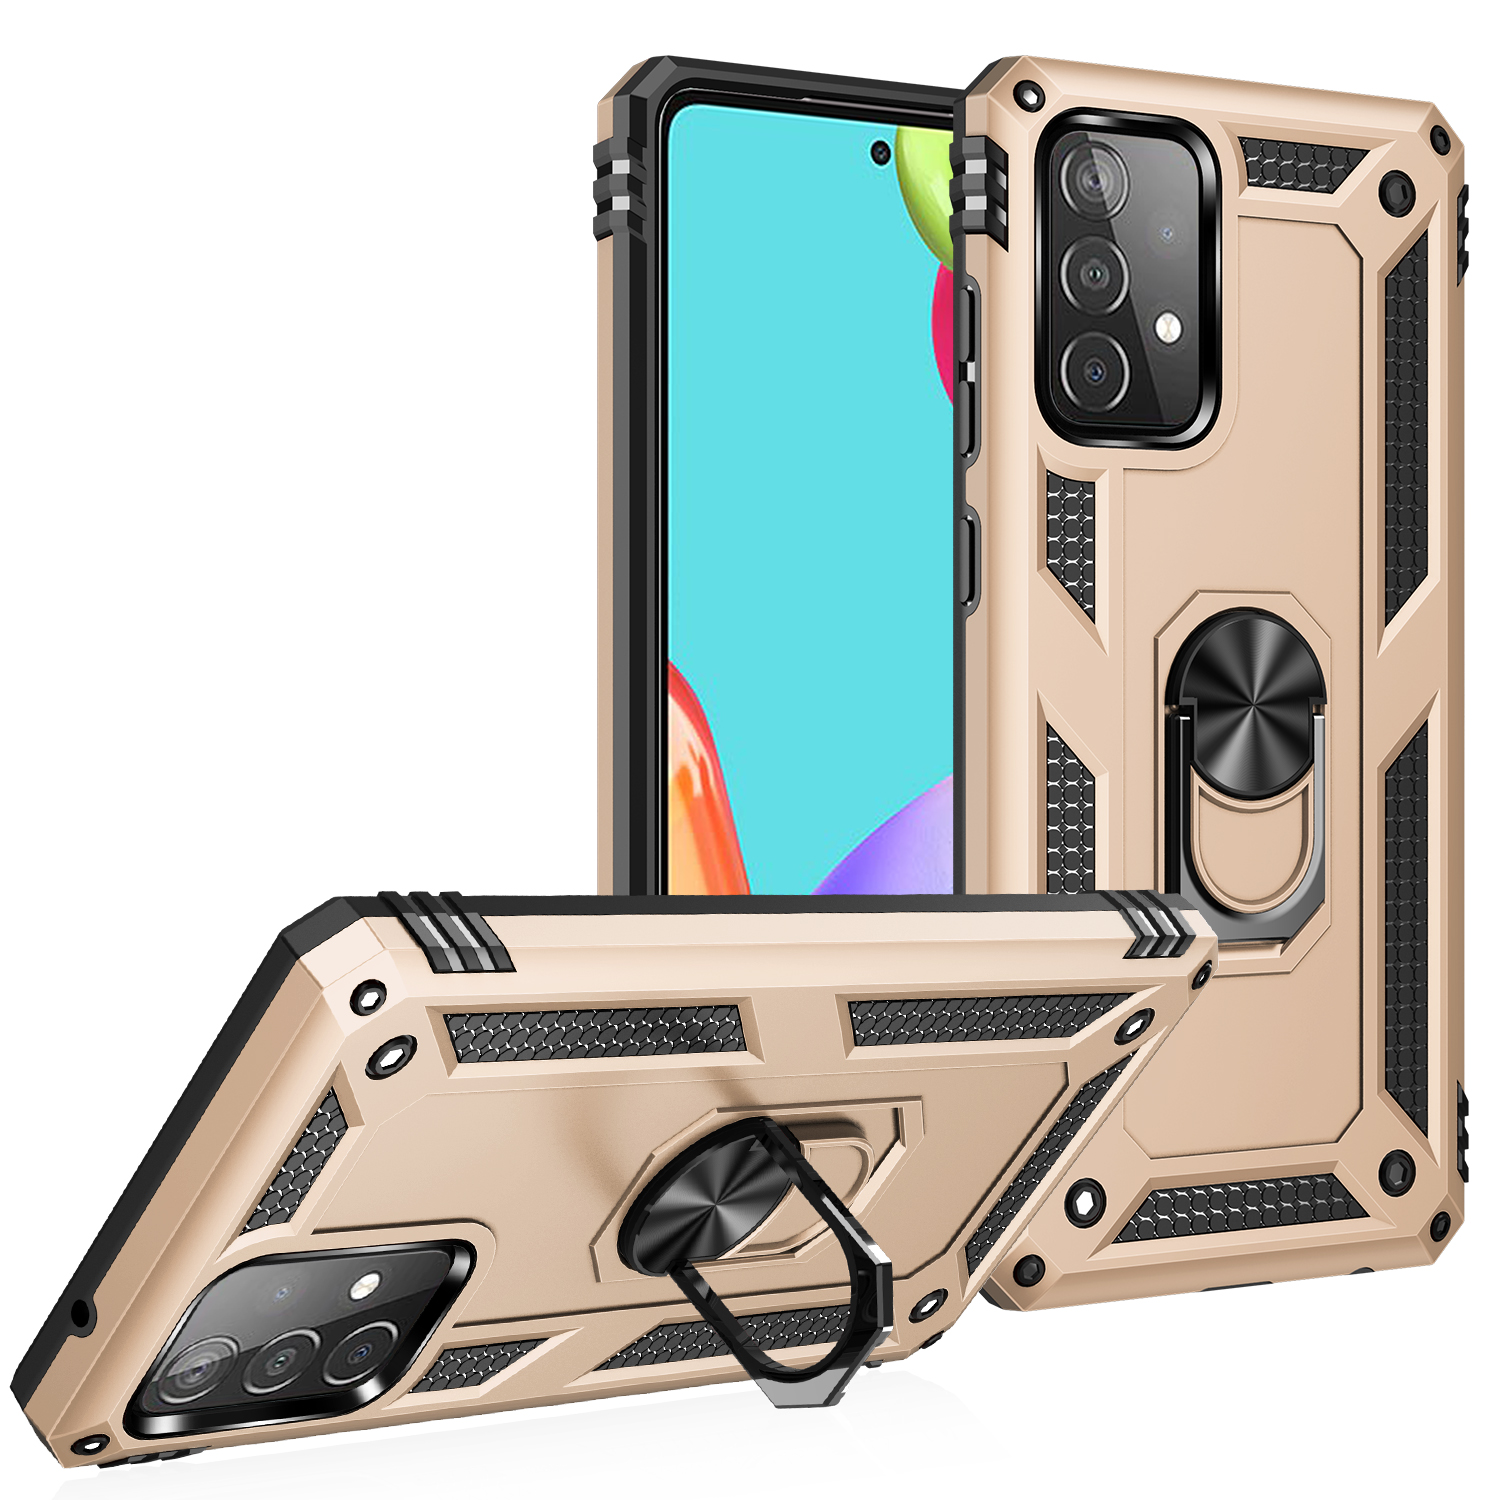 

Shockproof Phone Cases For Samsung Galaxy A73 A53 A43 A33 A23 A13 LTE A03s A03 Core A72 A52 A52s A32 A22 A12 A02s A02 Armor Hybrid Ring Stand Holder Protective Cover, Gold